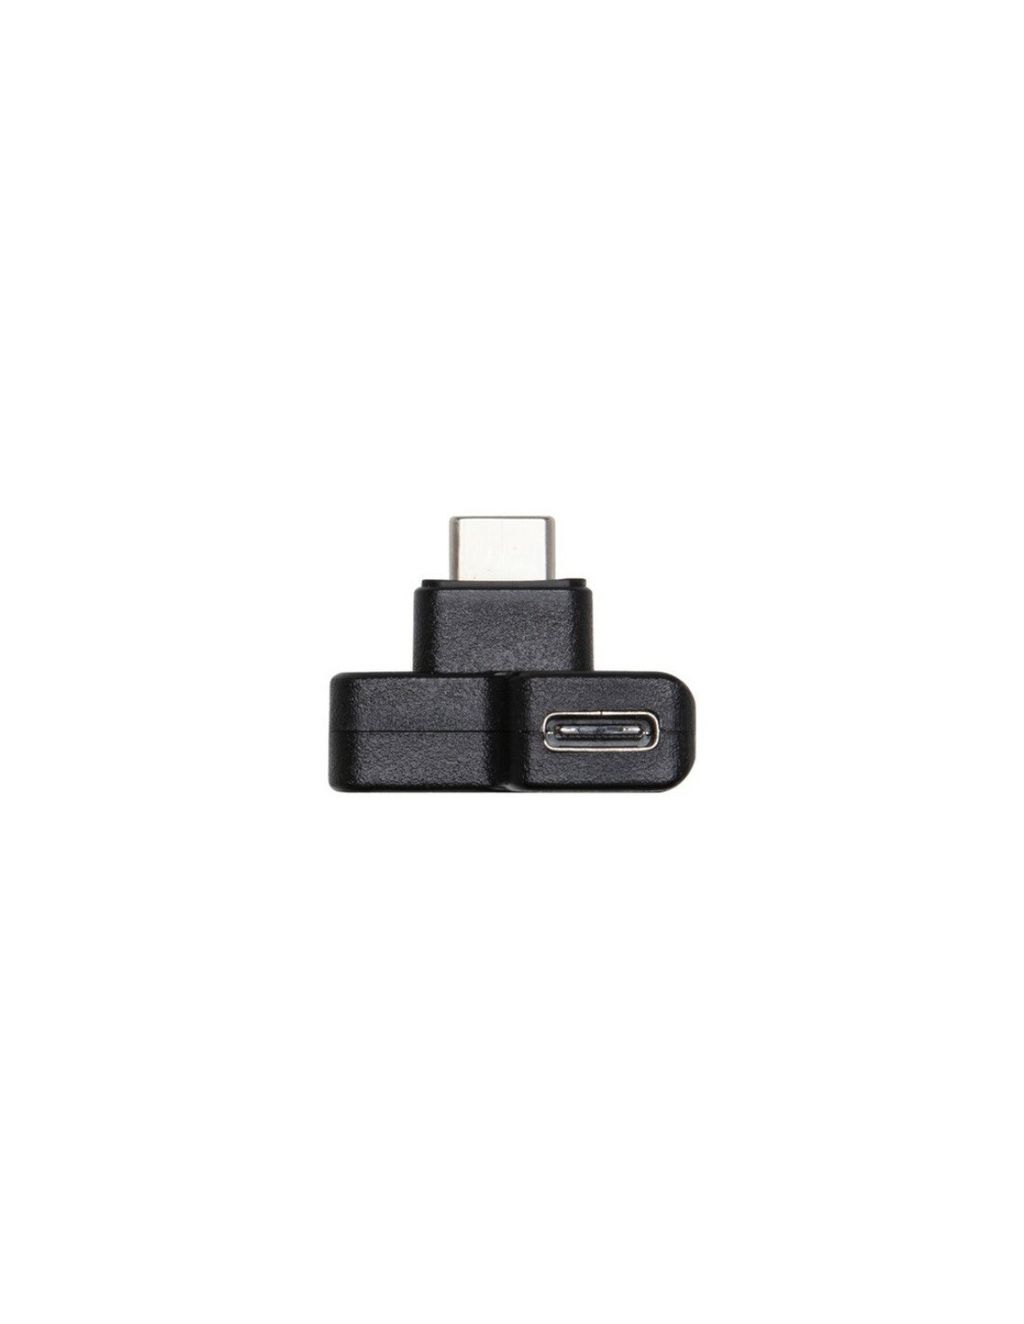 cynova-dual-adapter-for-osmo-action-from-usb-c-to-35-mm (1)